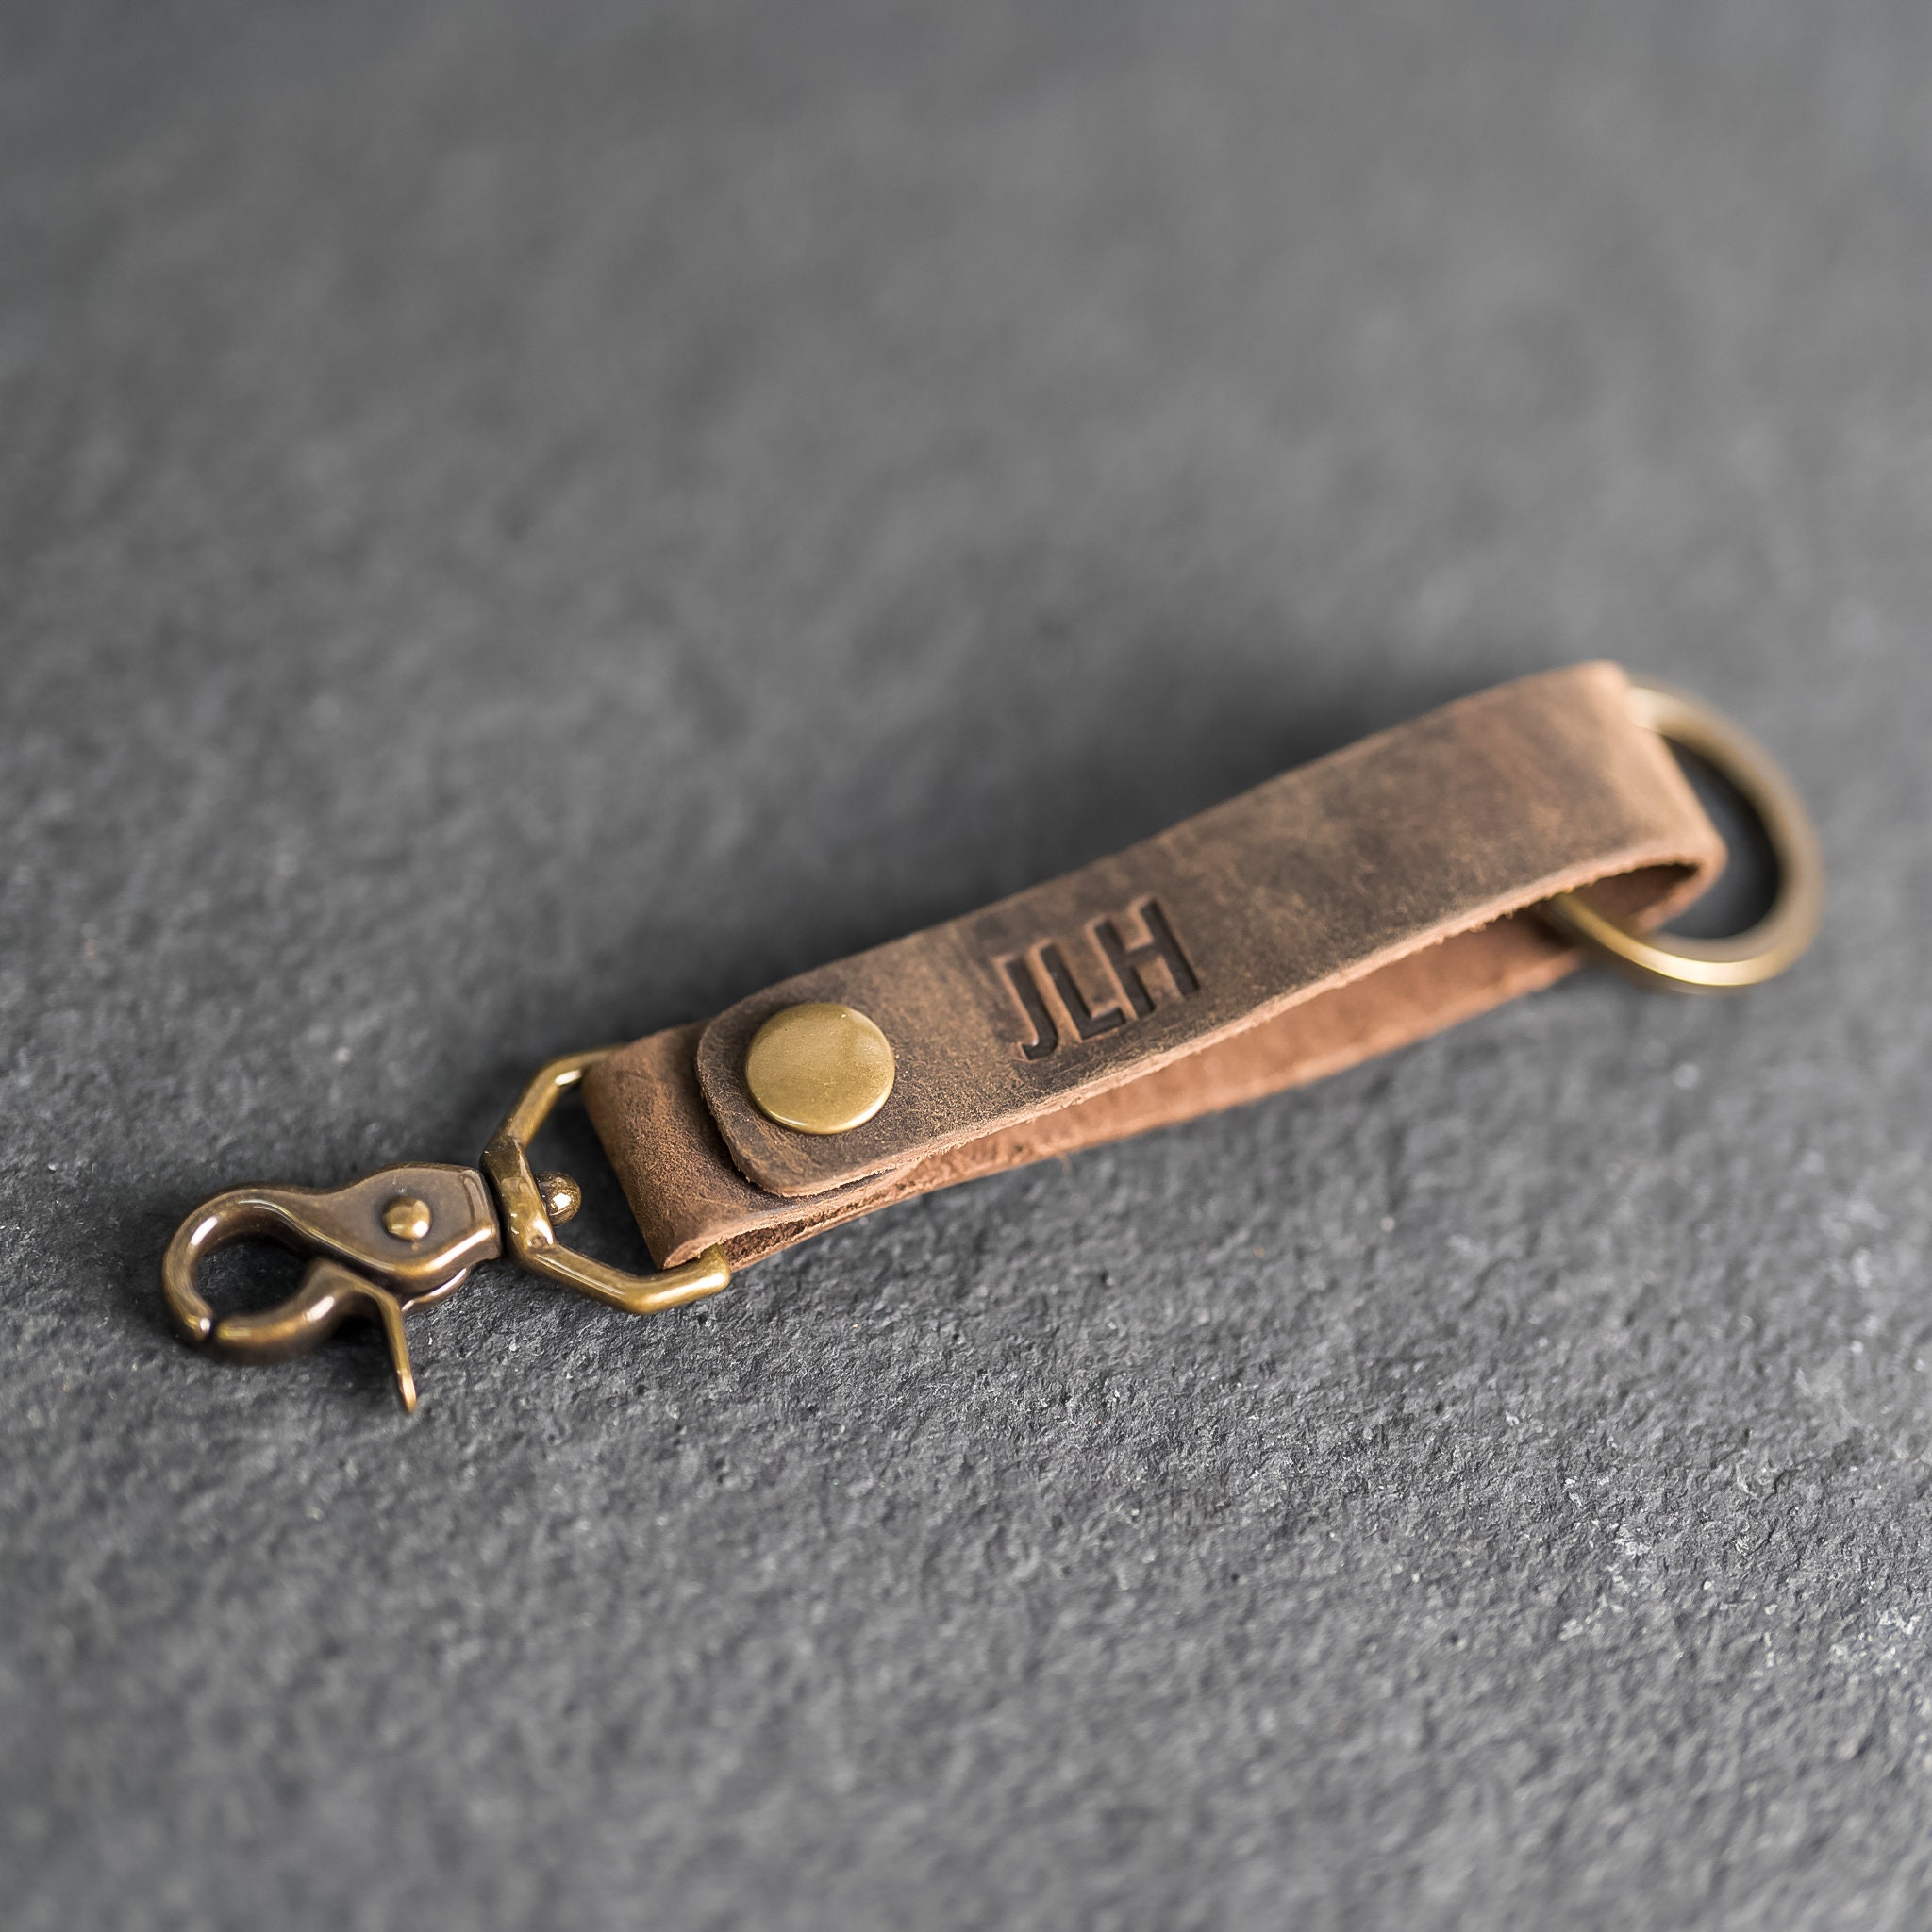 Leather Keychain for Women ➤➤➤ Personalized Key Fob